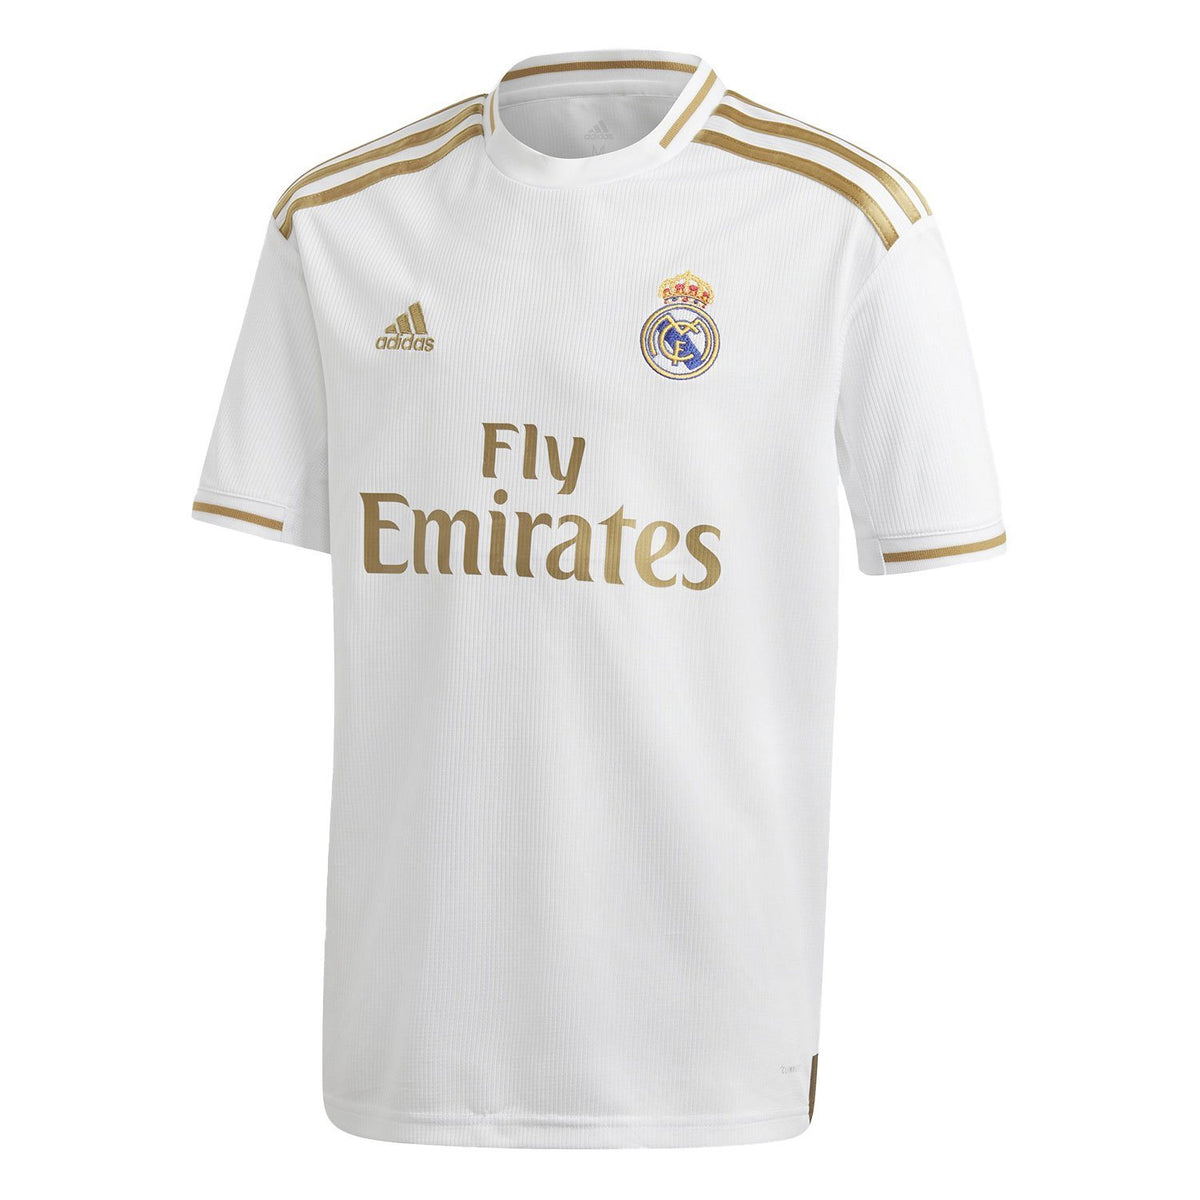 fly emirates jersey